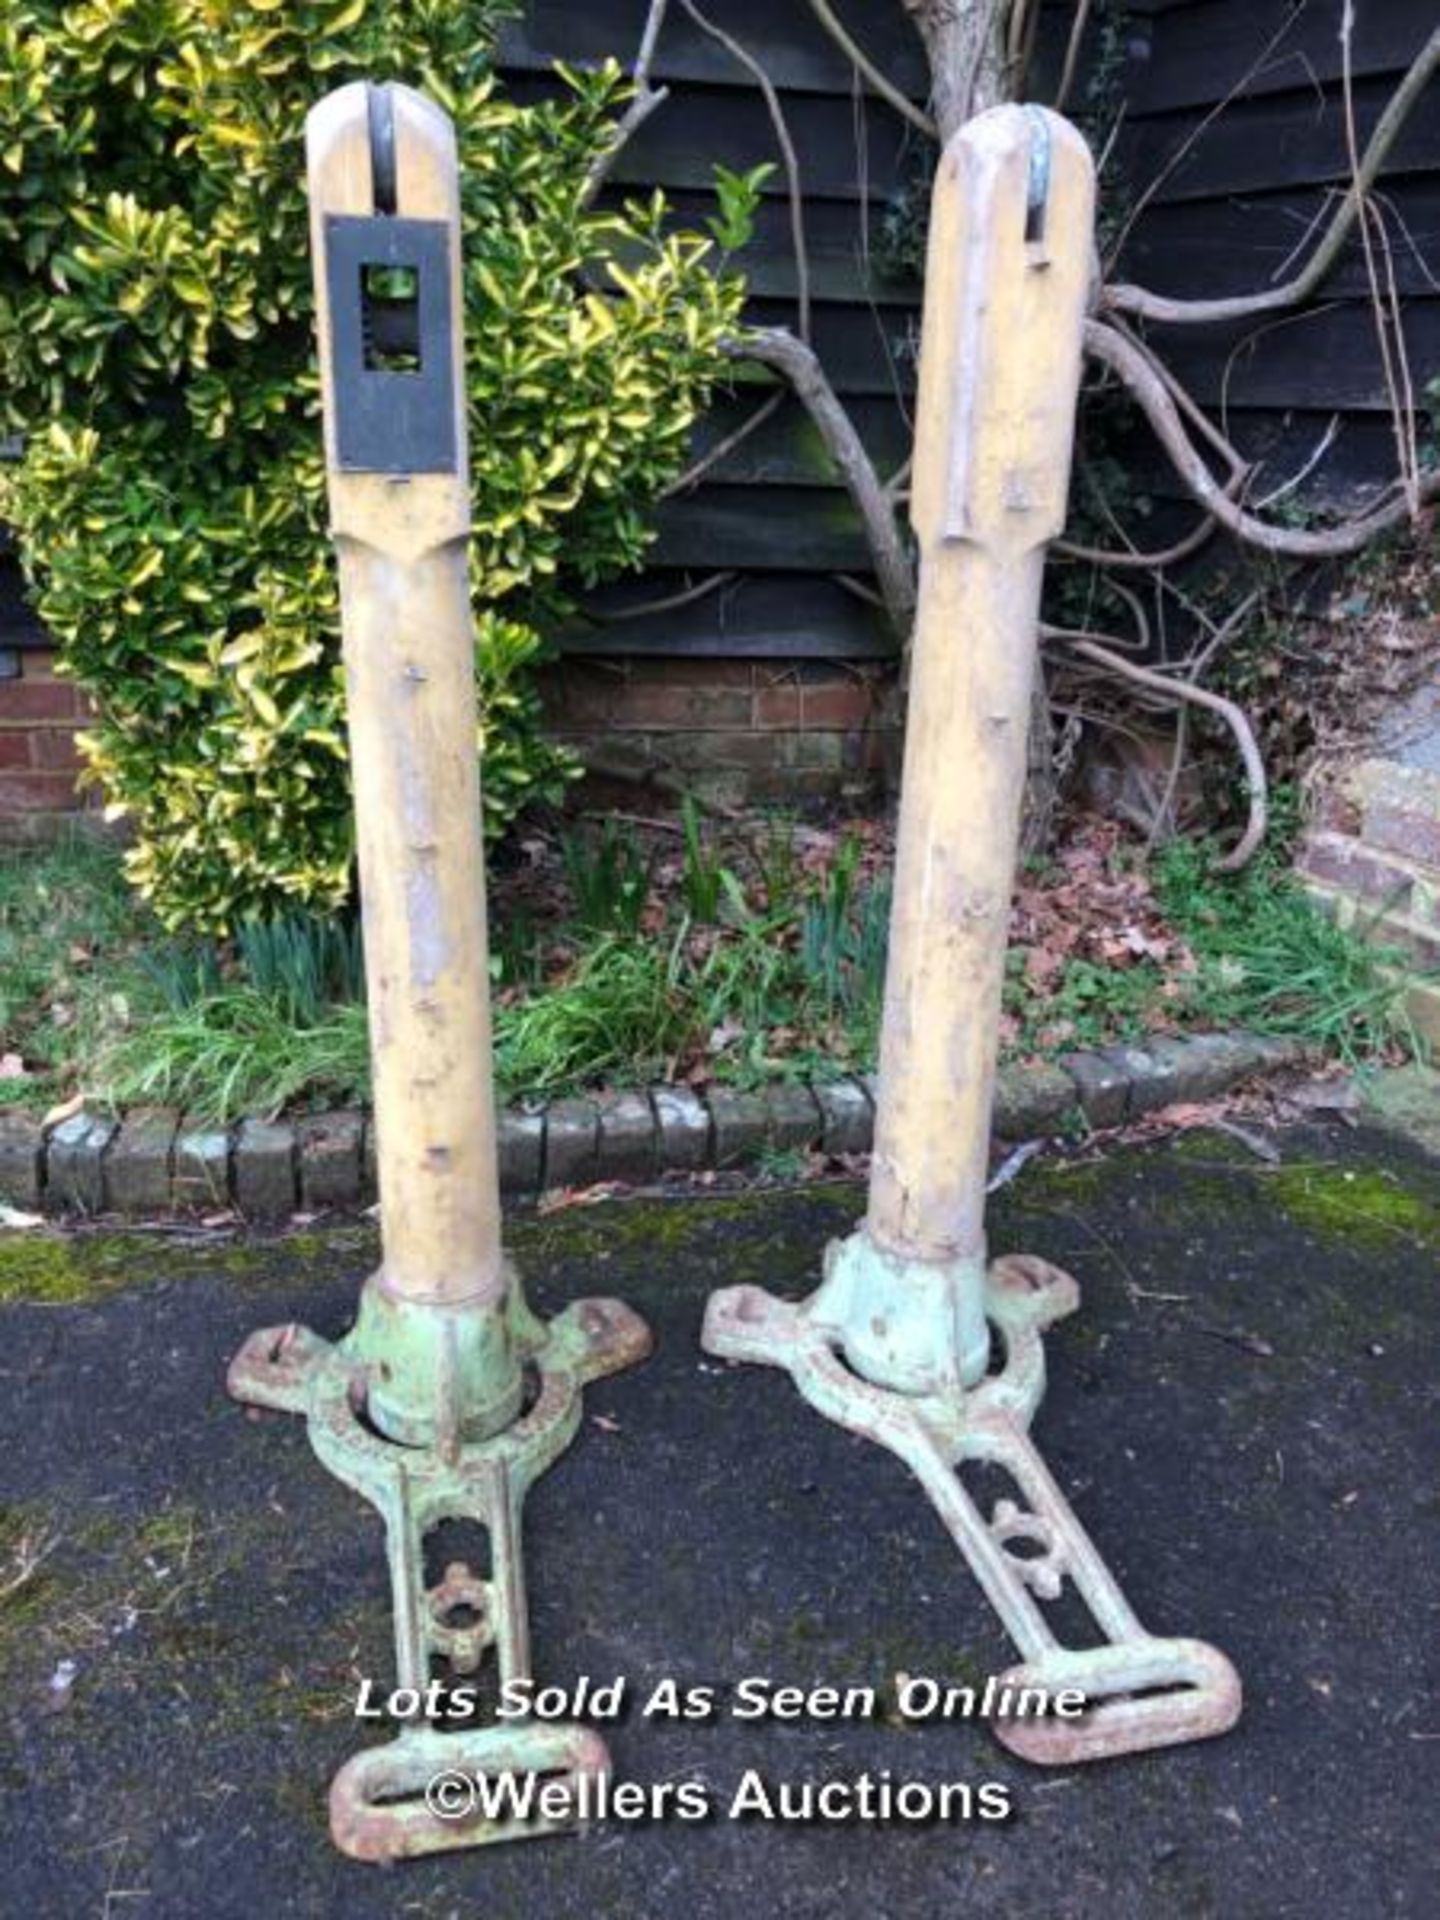 *PAIR OF EDWARDIAN SLAZENGER LAWN TENNIS NET POSTS, WOODEN POST AND CAST IRON BASE, UNRESTORED AND - Image 7 of 7